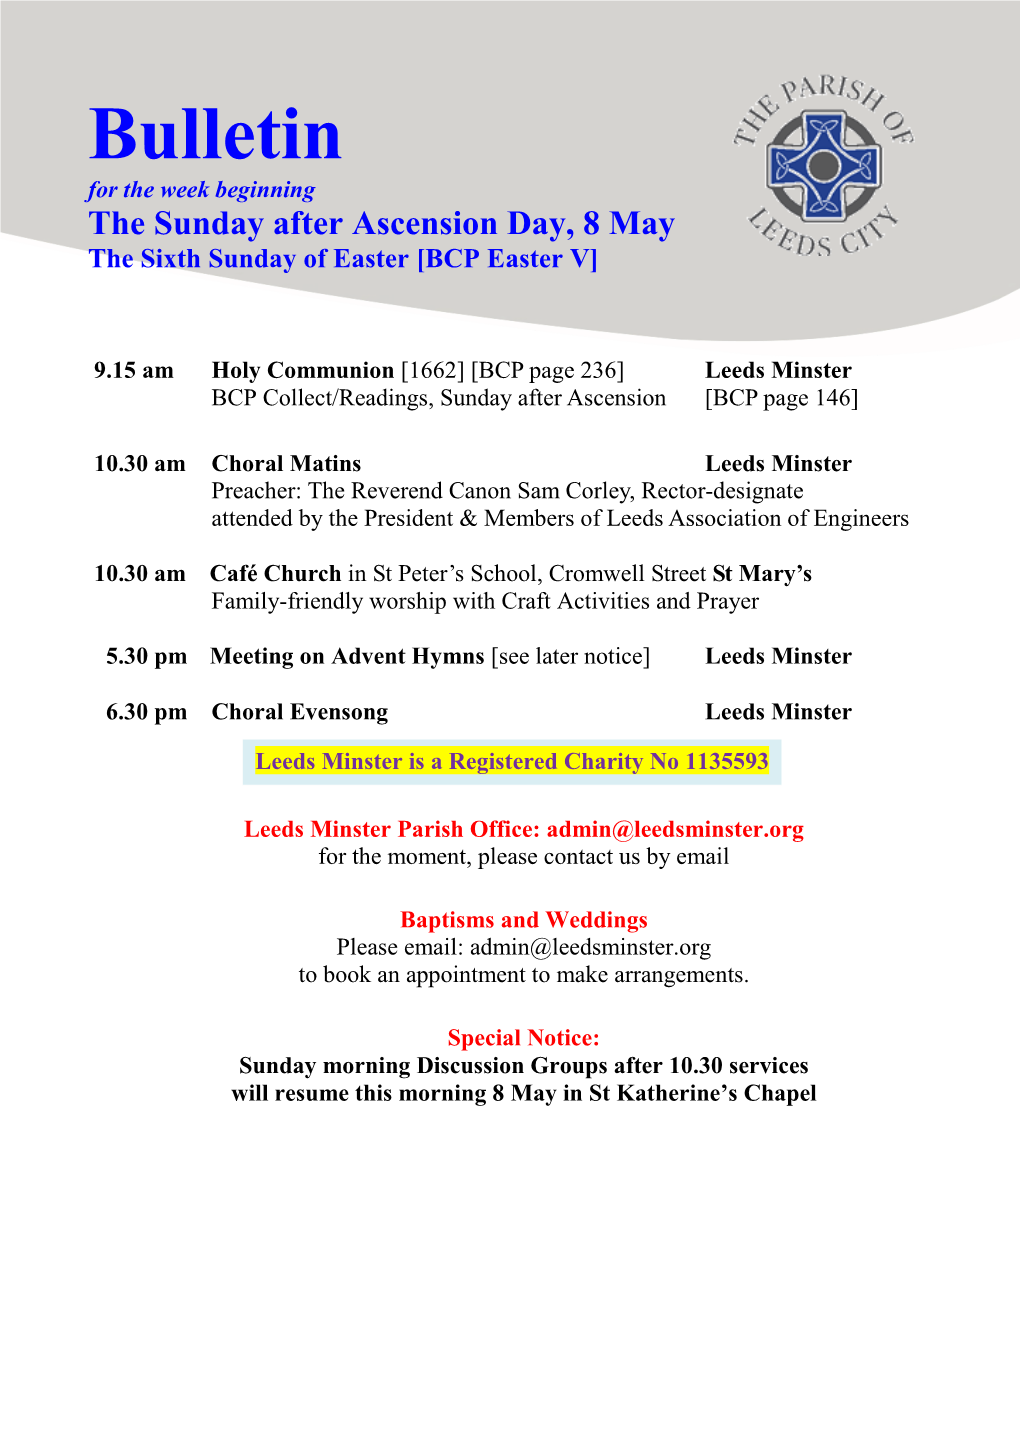 Bulletin for the Week Beginning the Sunday After Ascension Day, 8 May the Sixth Sunday of Easter [BCP Easter V]